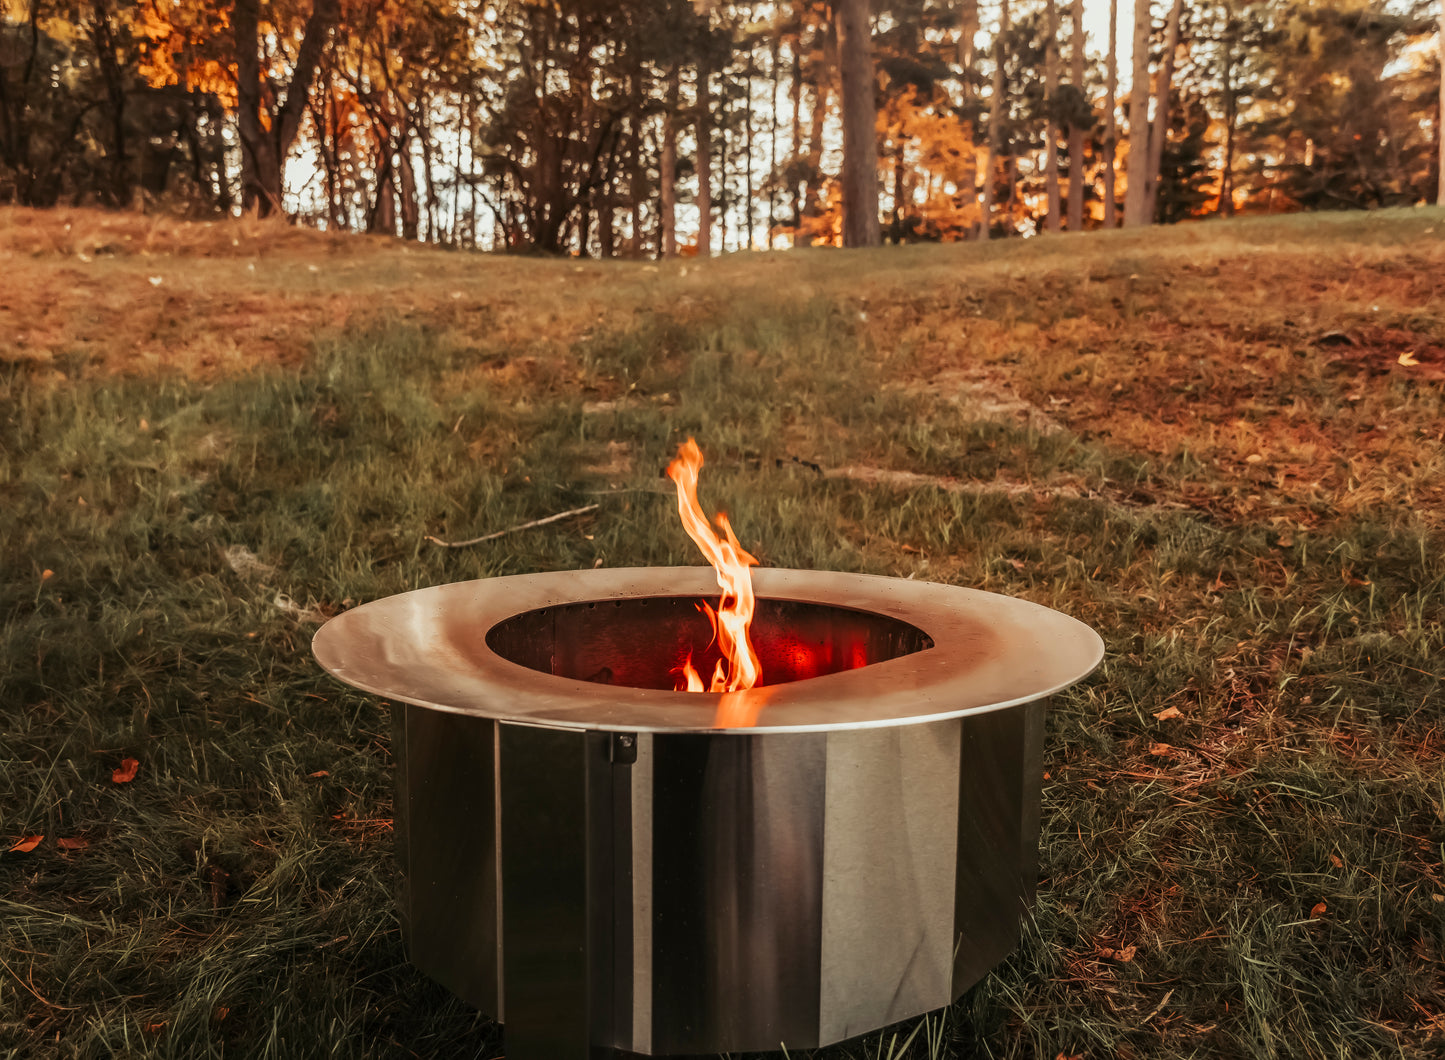 Firegear LUME Multisided Smokeless Wood Burning Fire Pit with Sear Cooking Surface, 21-Inches